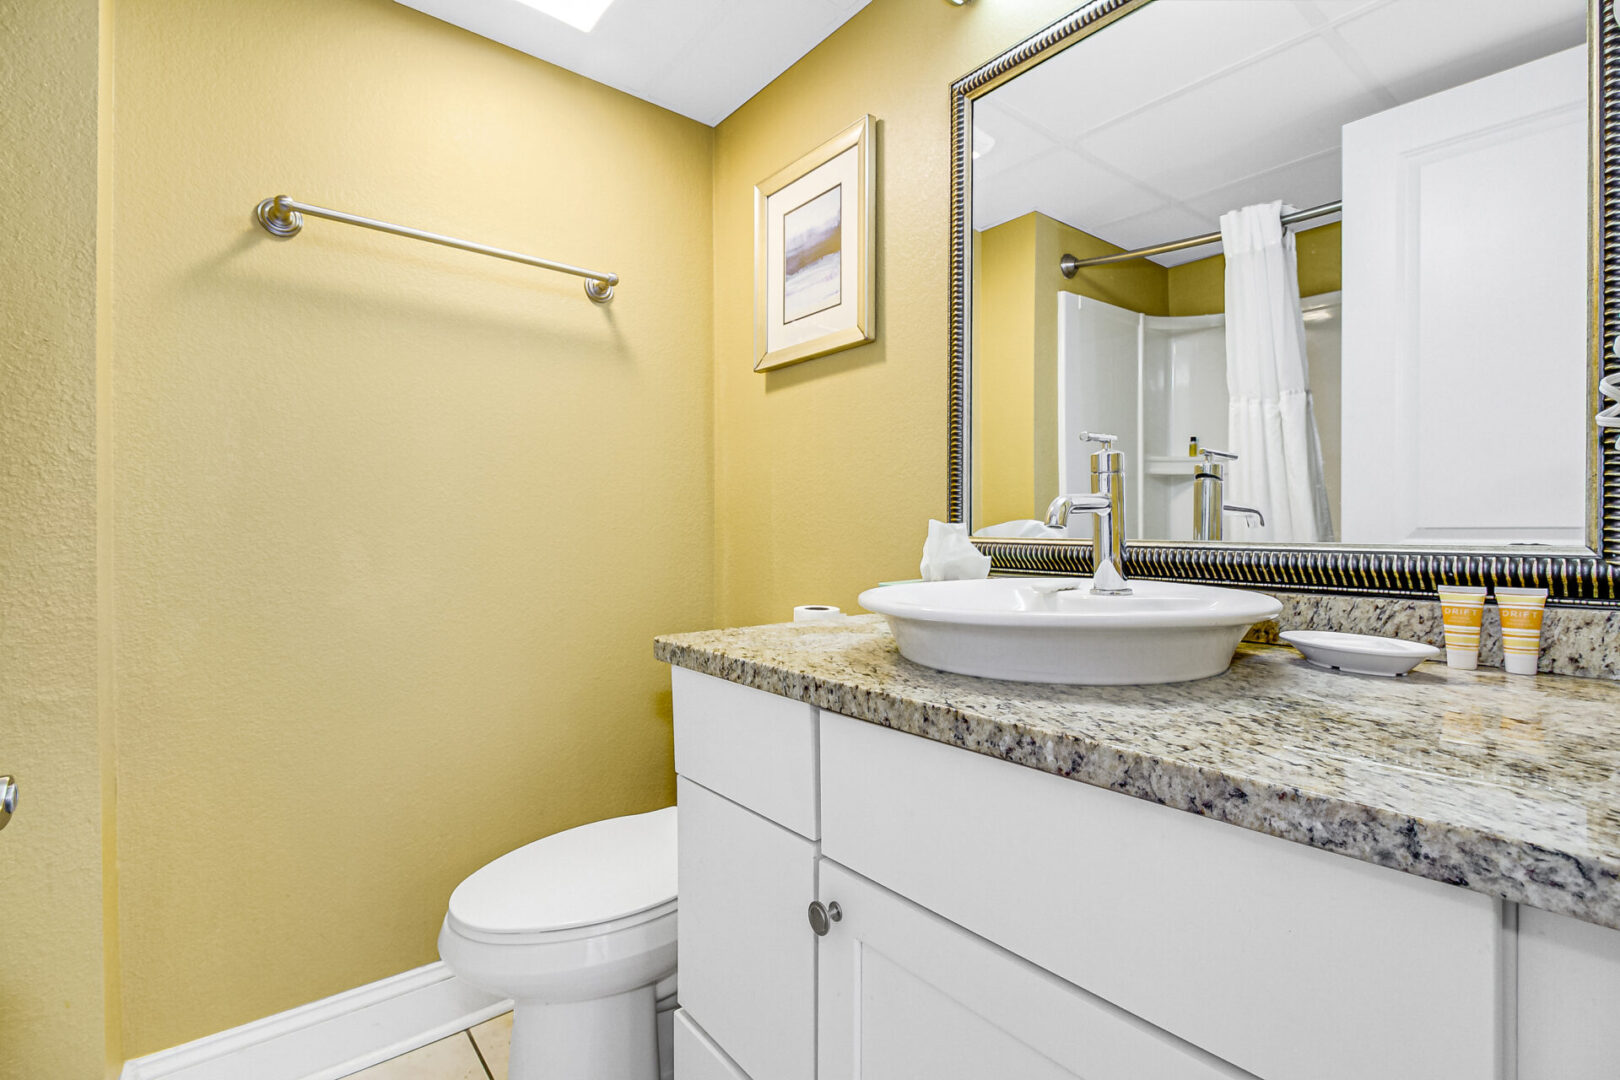 A bathroom with yellow walls